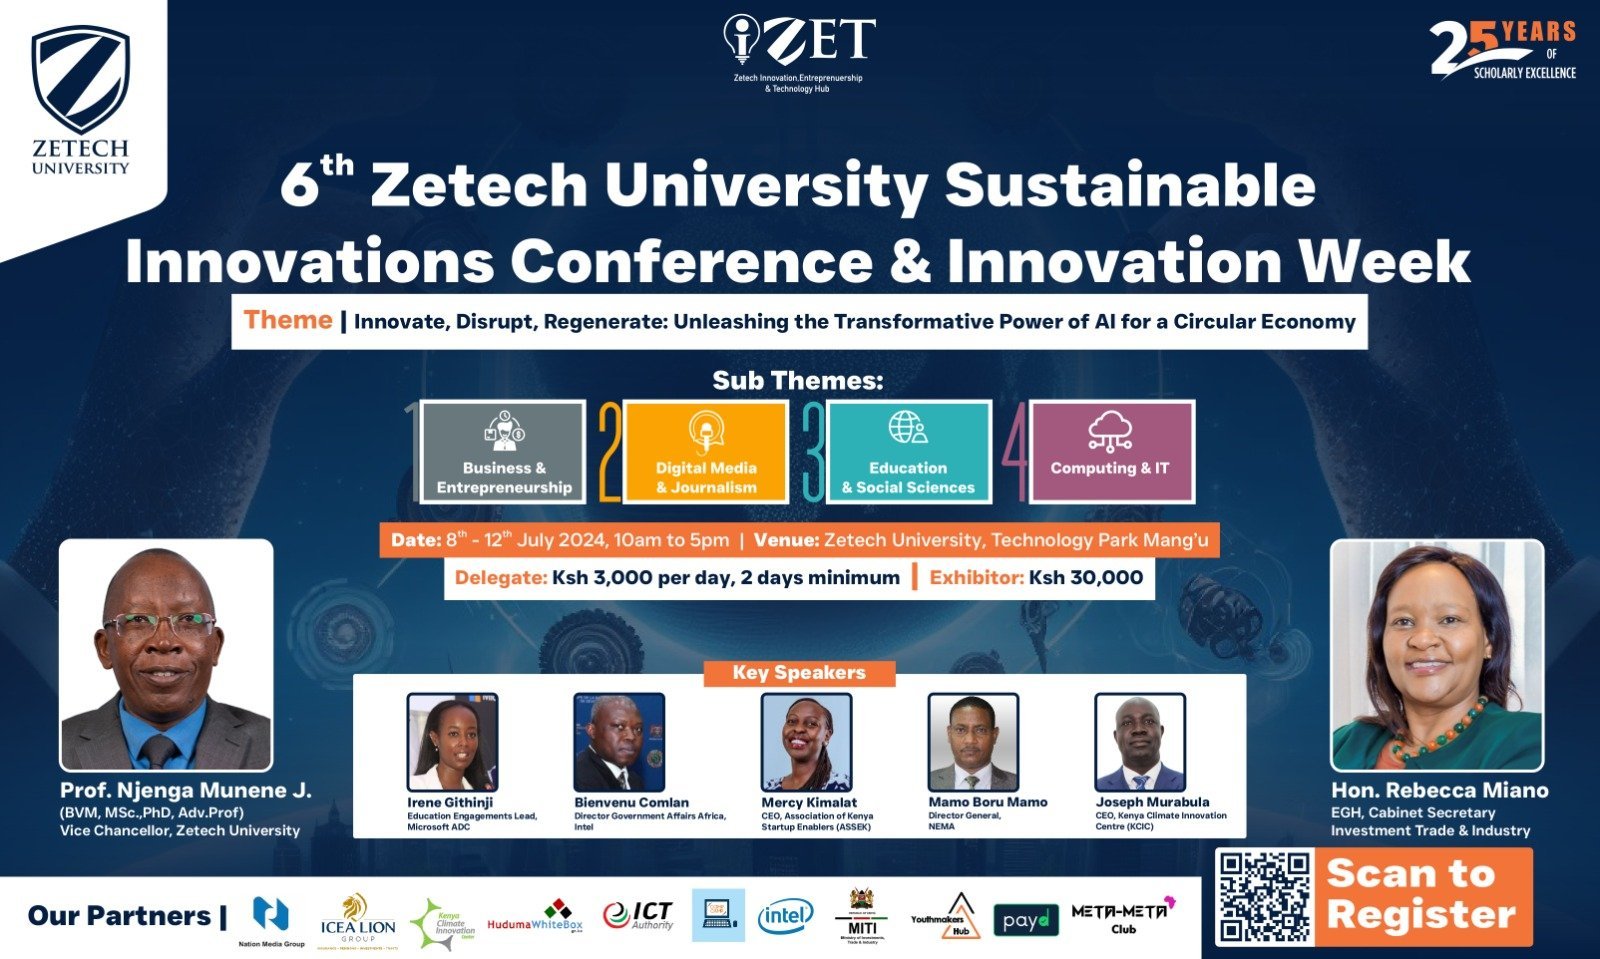 6th Zetech University Sustainable Innovations Conference and Innovation Week